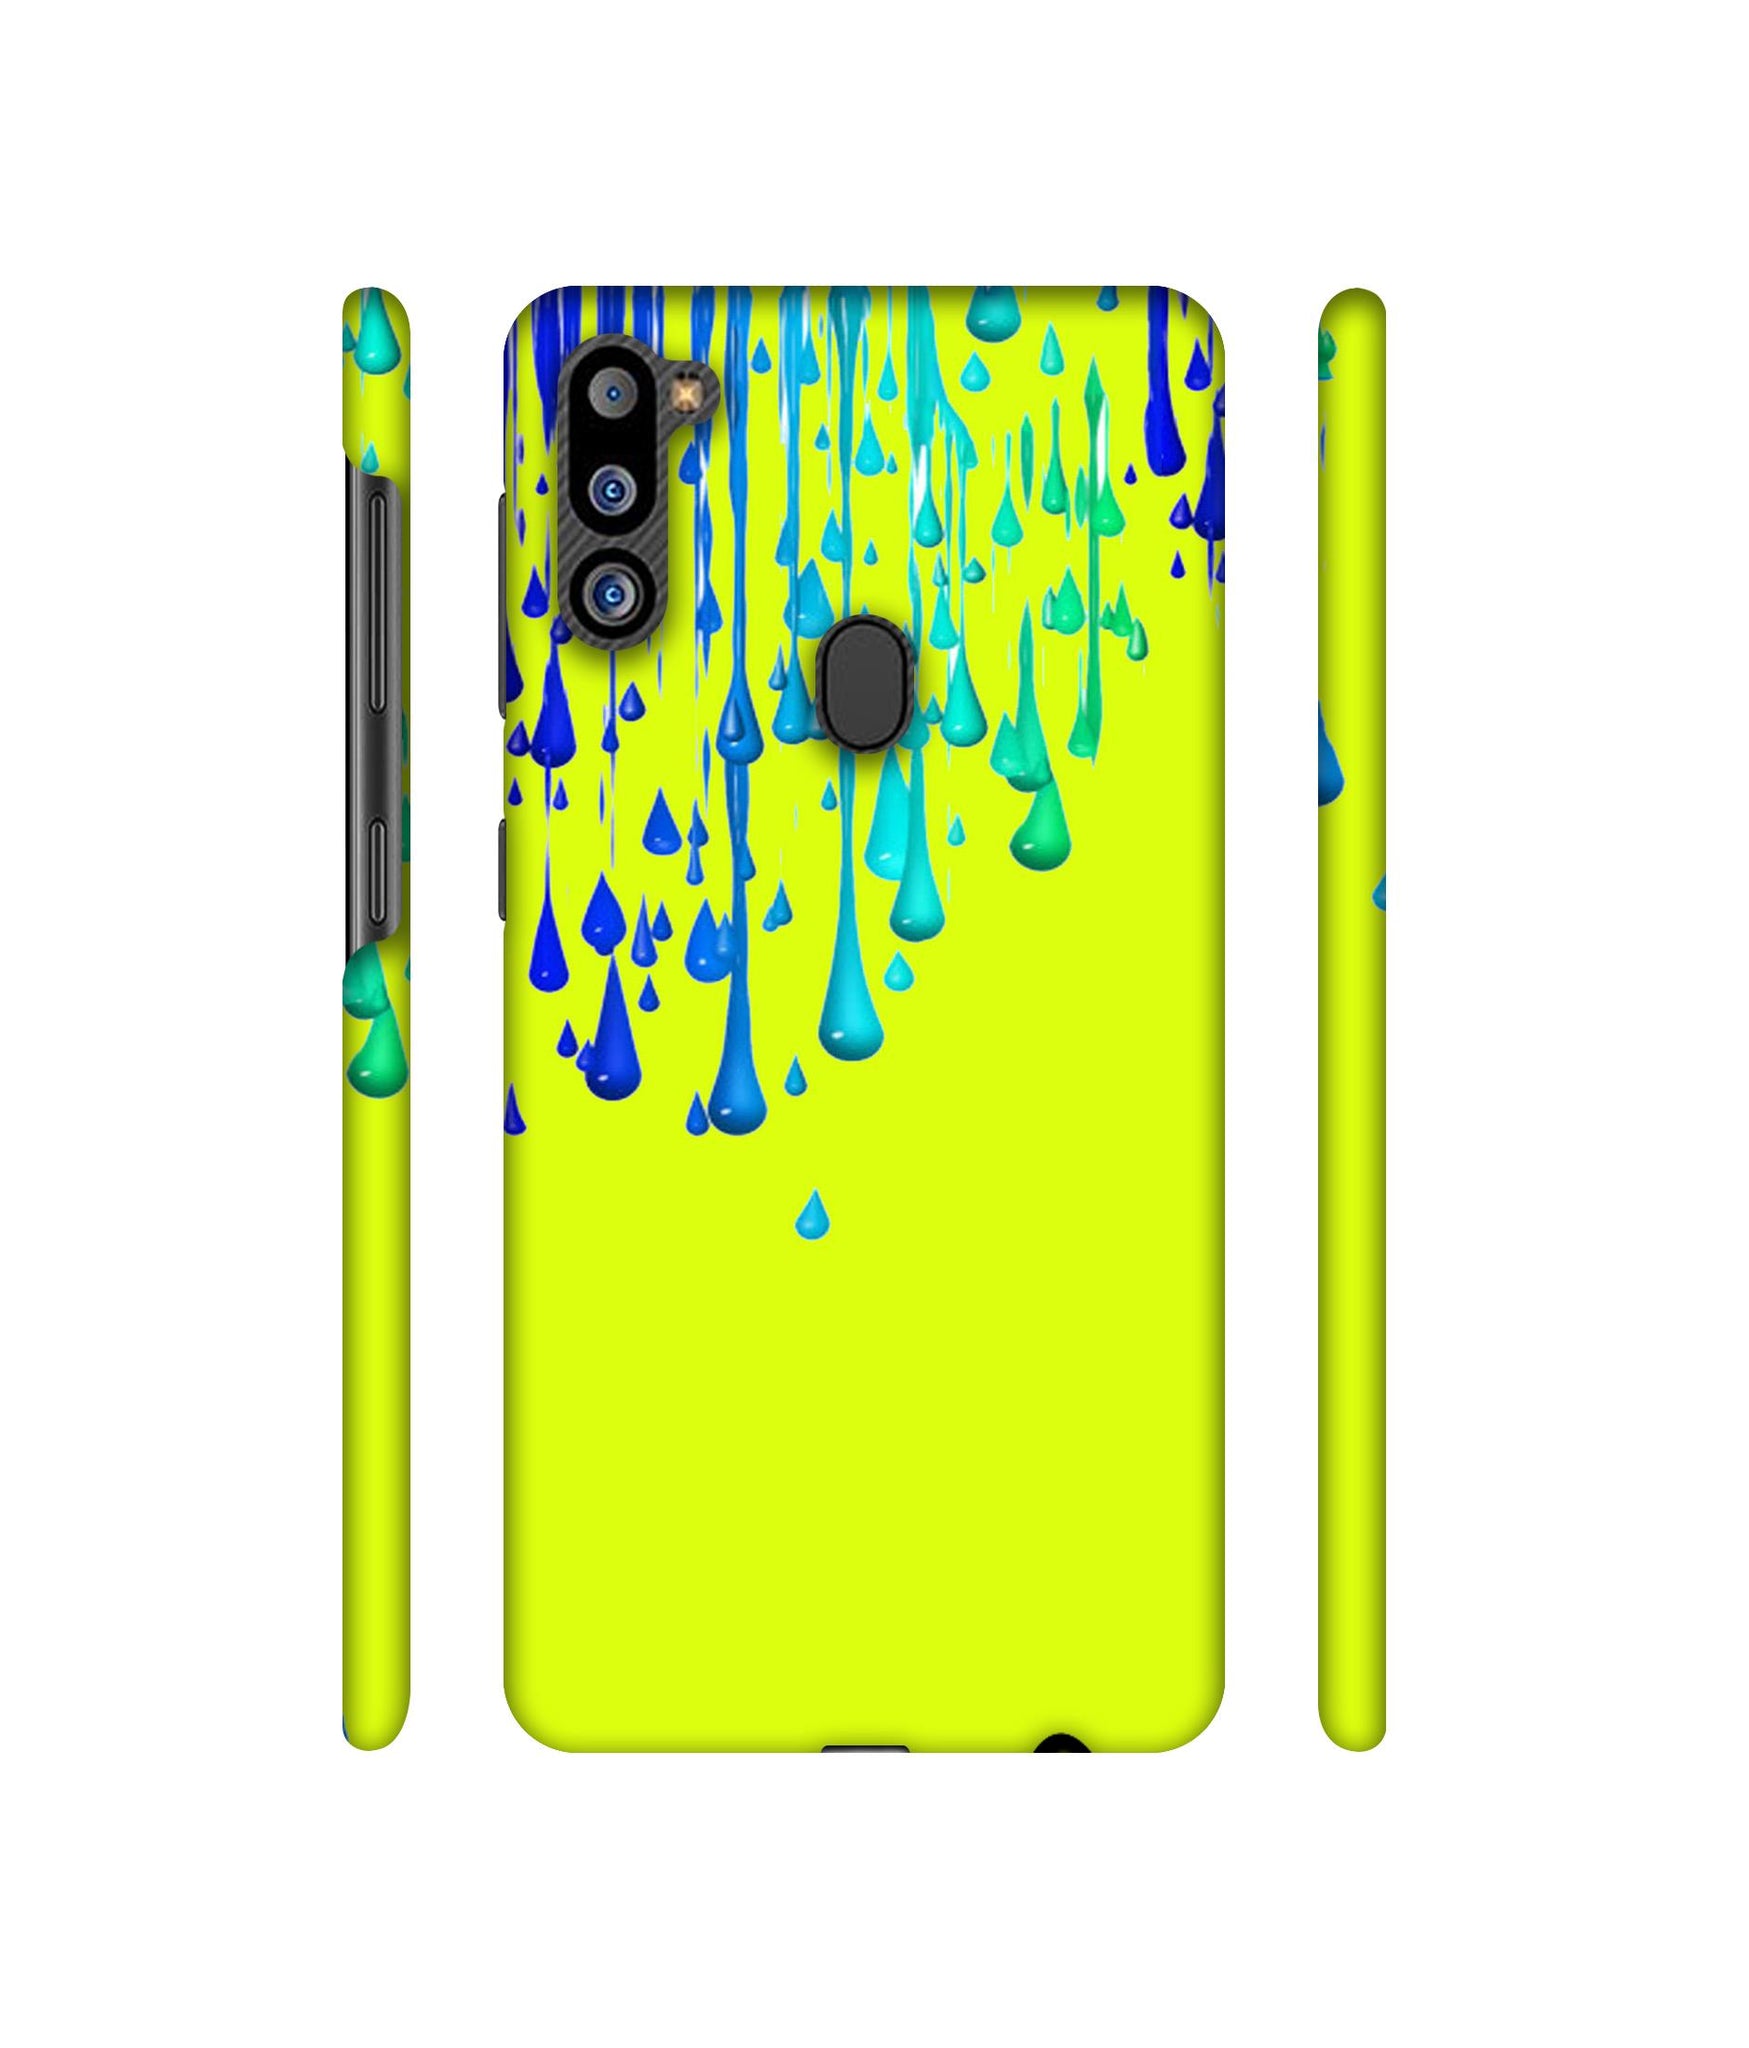 Neon Paint Designer Hard Back Cover for Samsung Galaxy M21 2021 Edition